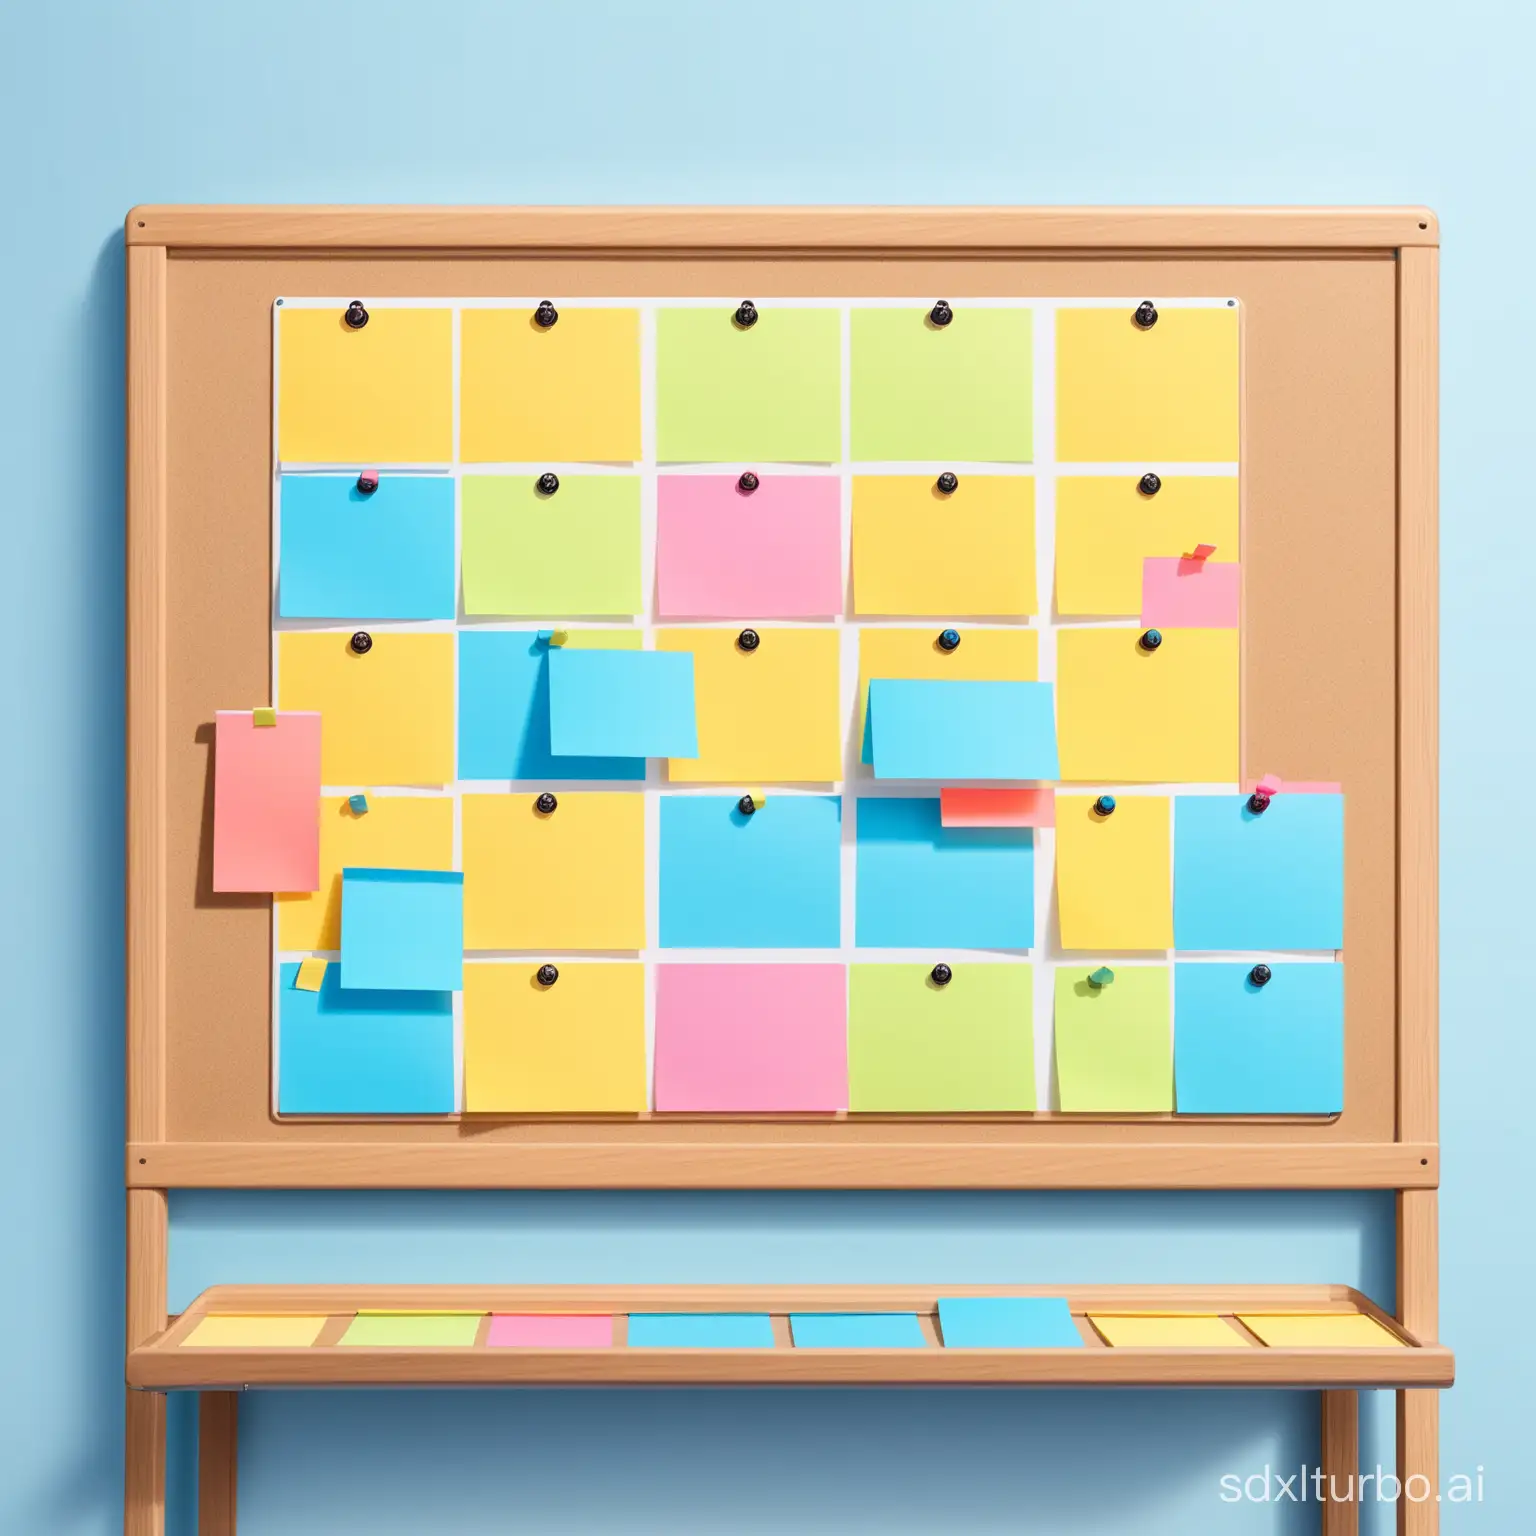 Colorful-Sticky-Notes-Grid-on-Whiteboard-with-Camera-View